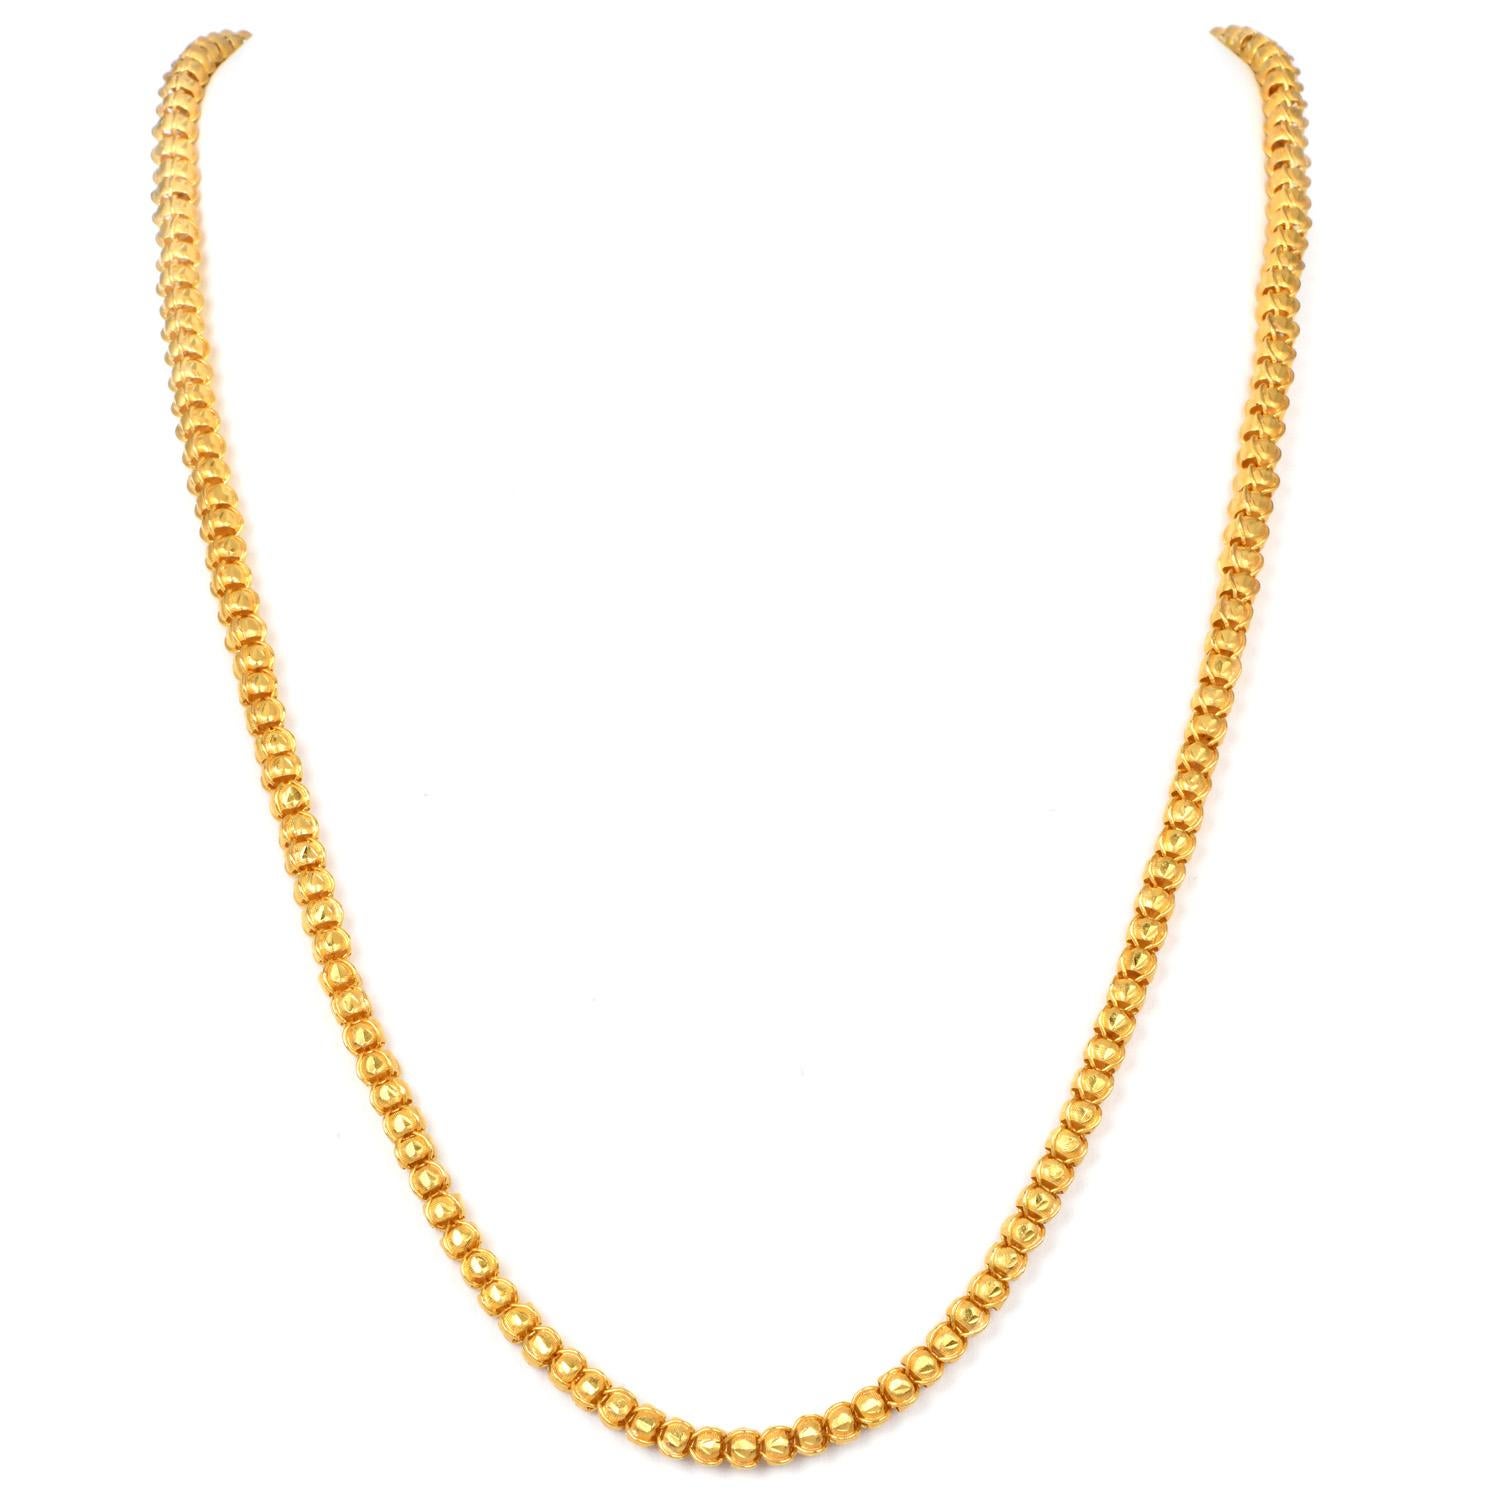 Featuring a vintage necklace is a masterpiece of high karat gold craftsmanship, exquisitely designed in 22K gold.

It features intricate engravings with a combination of gorgeous satin finishes and handcrafted filigree details.
From the hook to the